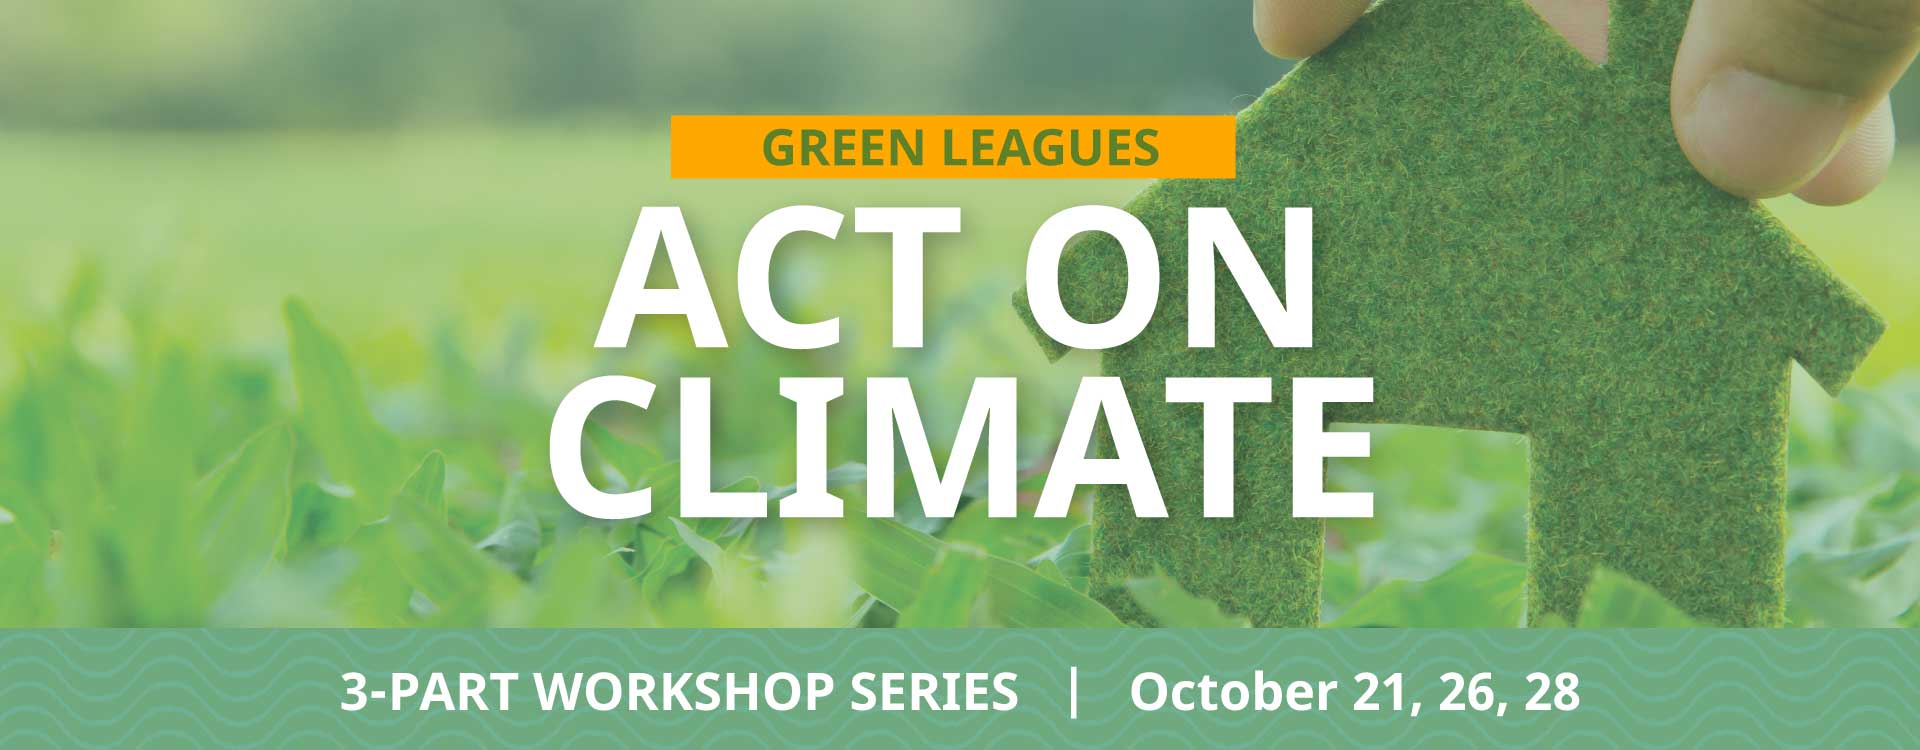 Climate Positive Energy supporting Green Sports Day on October 6